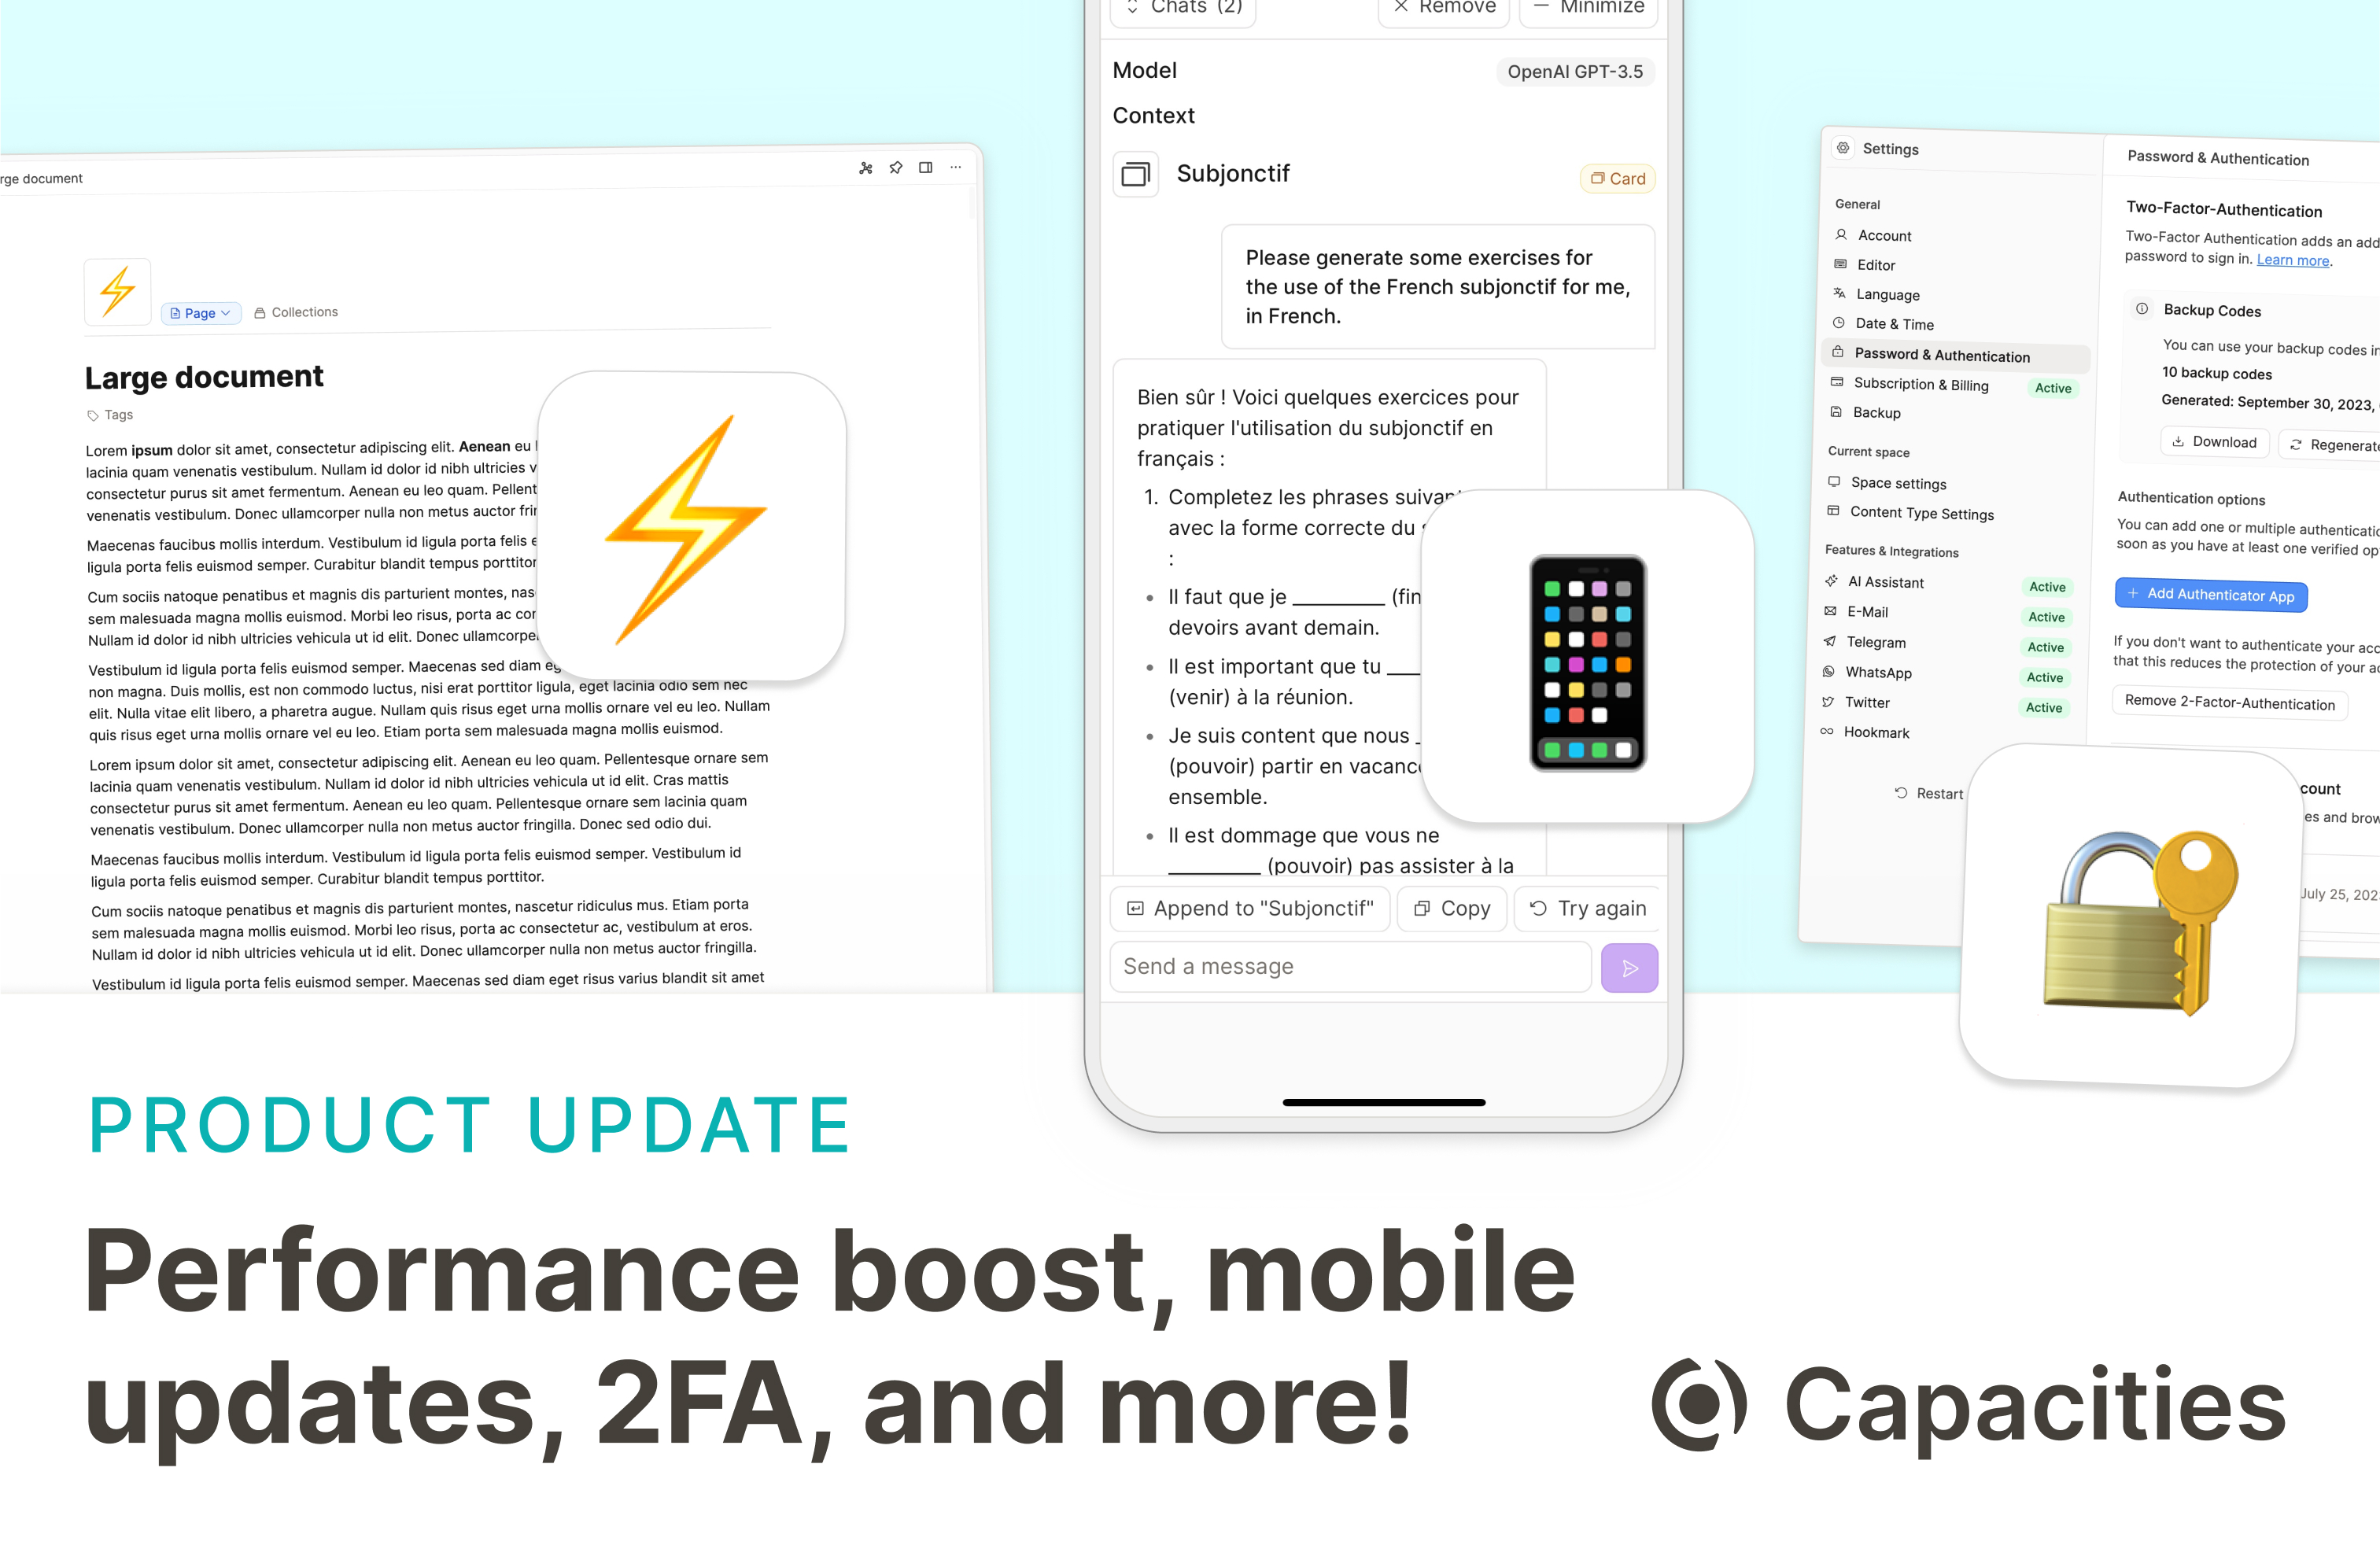 Performance, 2FA & mobile gets an update